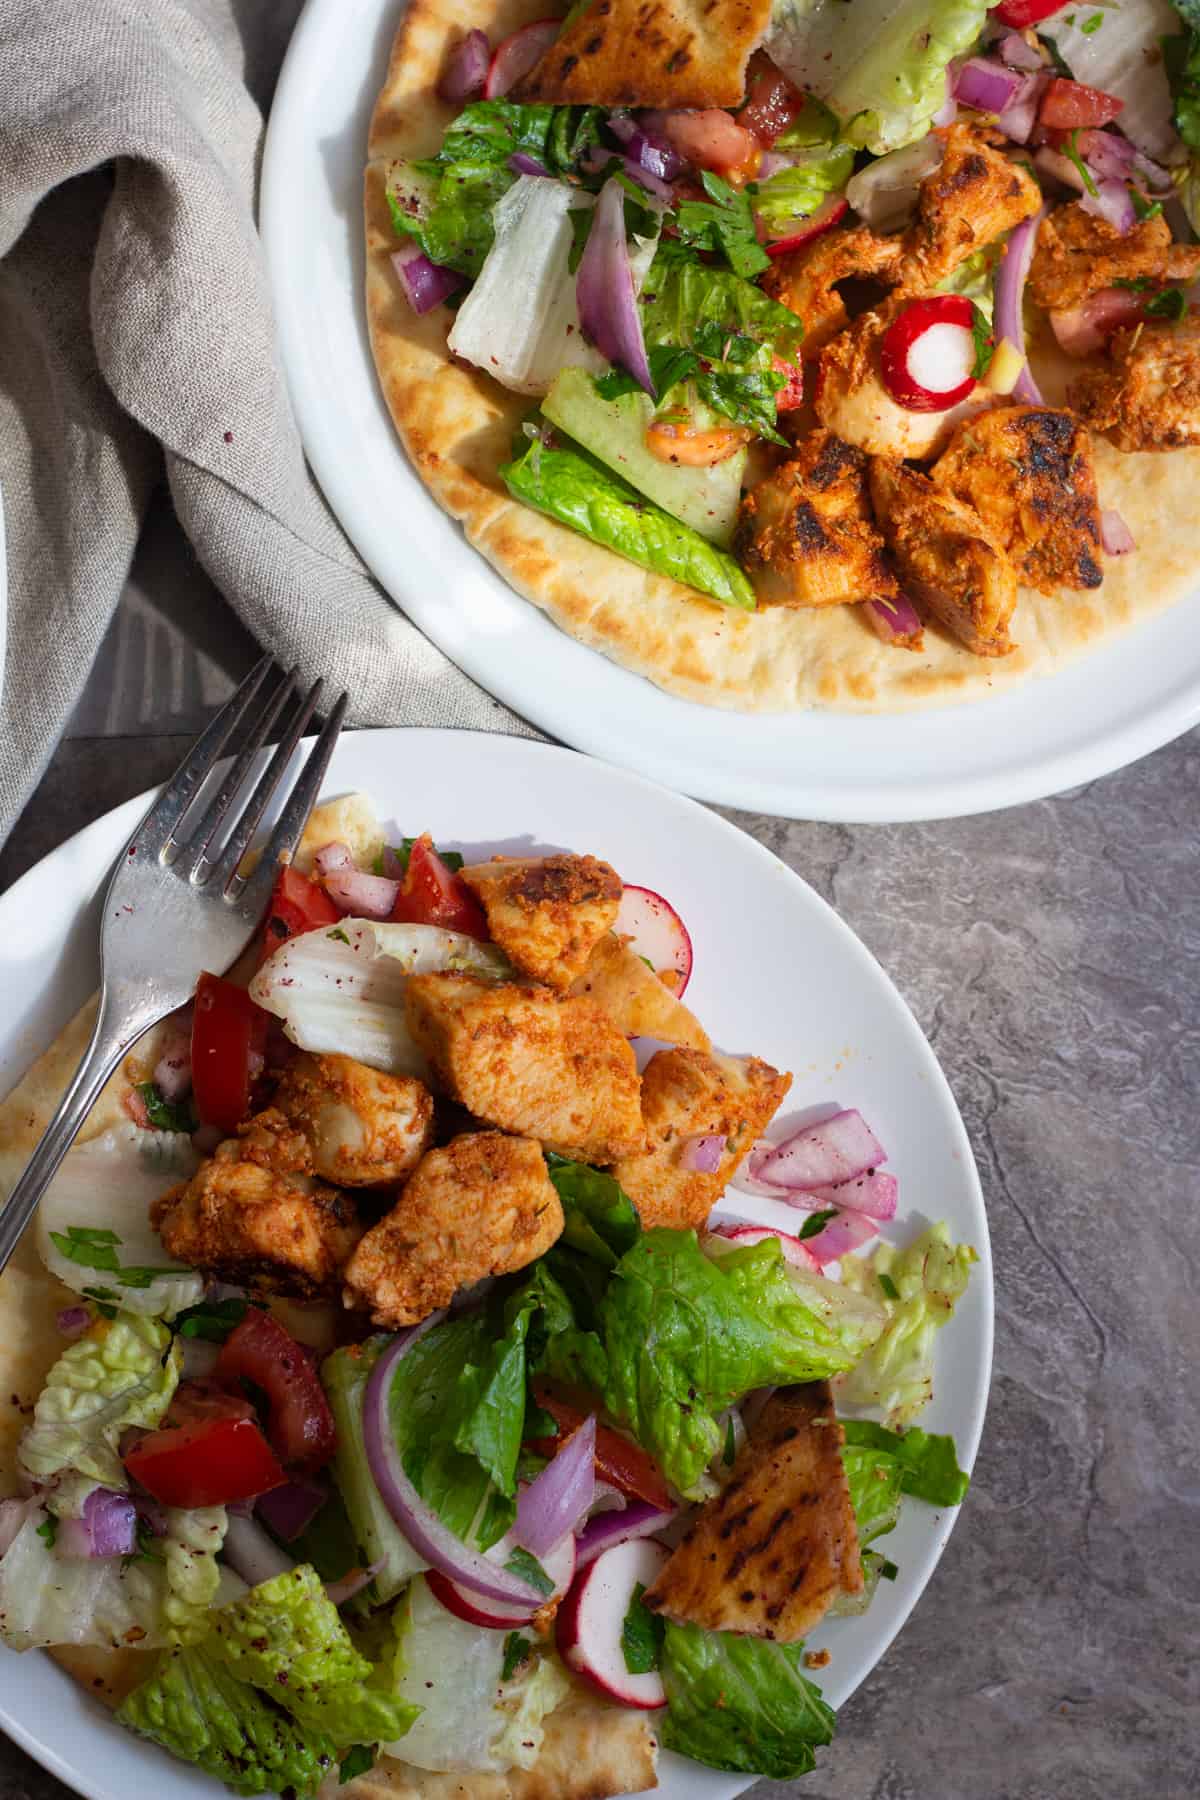 Shish Taouk is Tender chicken marinated in yogurt, lemon and garlic which makes one delicious Middle Eastern meal for the family. 